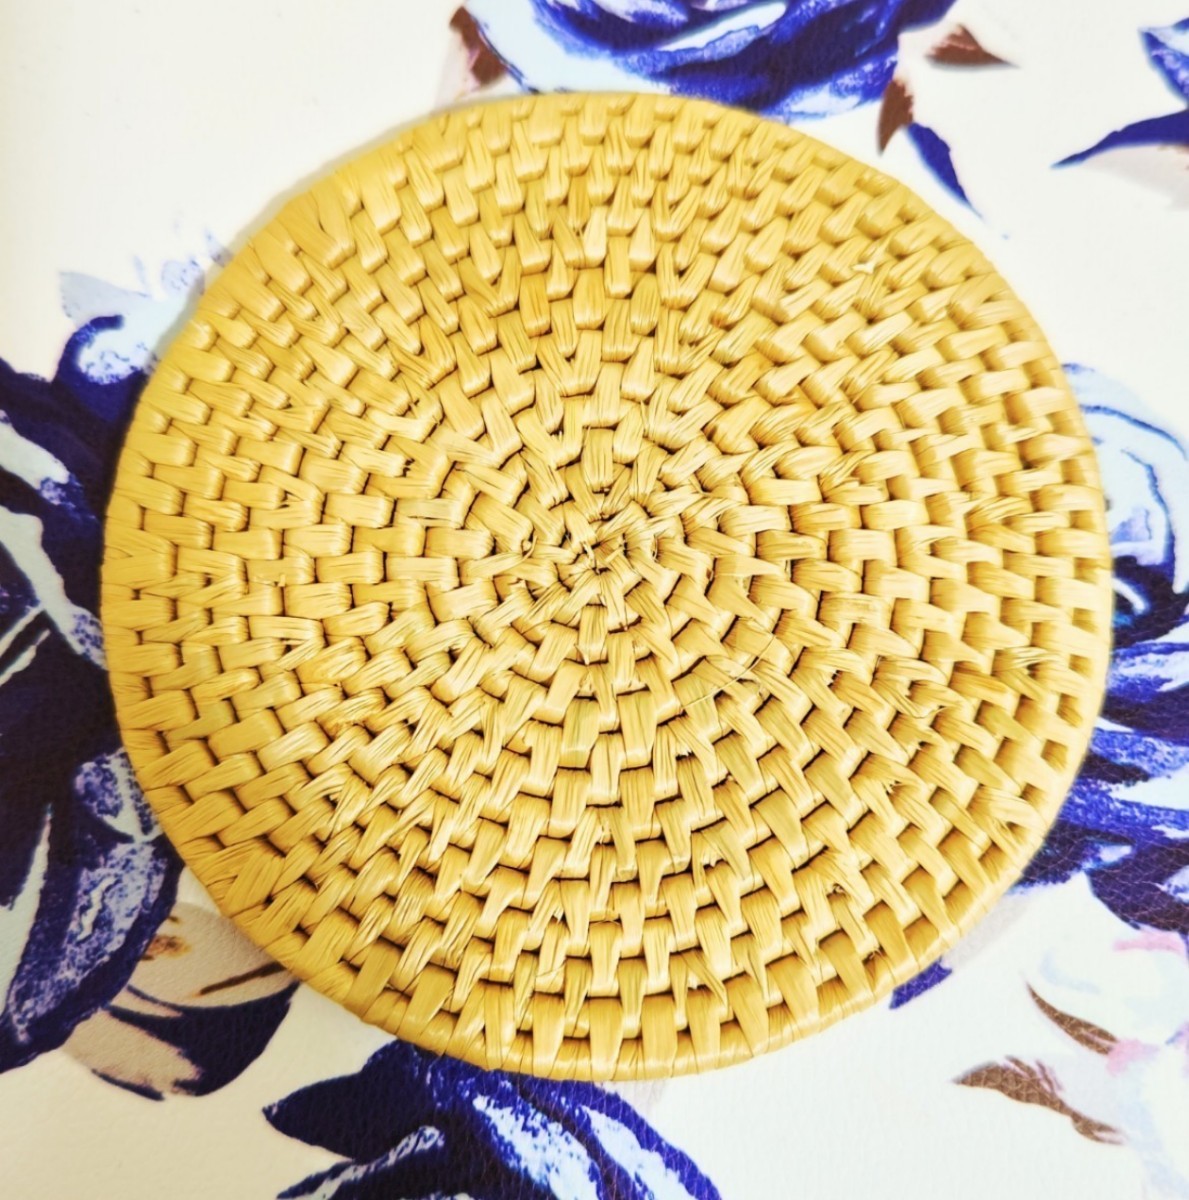 Immediate decision [☆ 2nd and subsequent items can be bundled for 800 yen ☆] New handmade hand-knitted pot holder, pot holder, large coaster, vase holder, rattan tea utensils, inspected: Ata bamboo crafts, handmade works, kitchen supplies, others